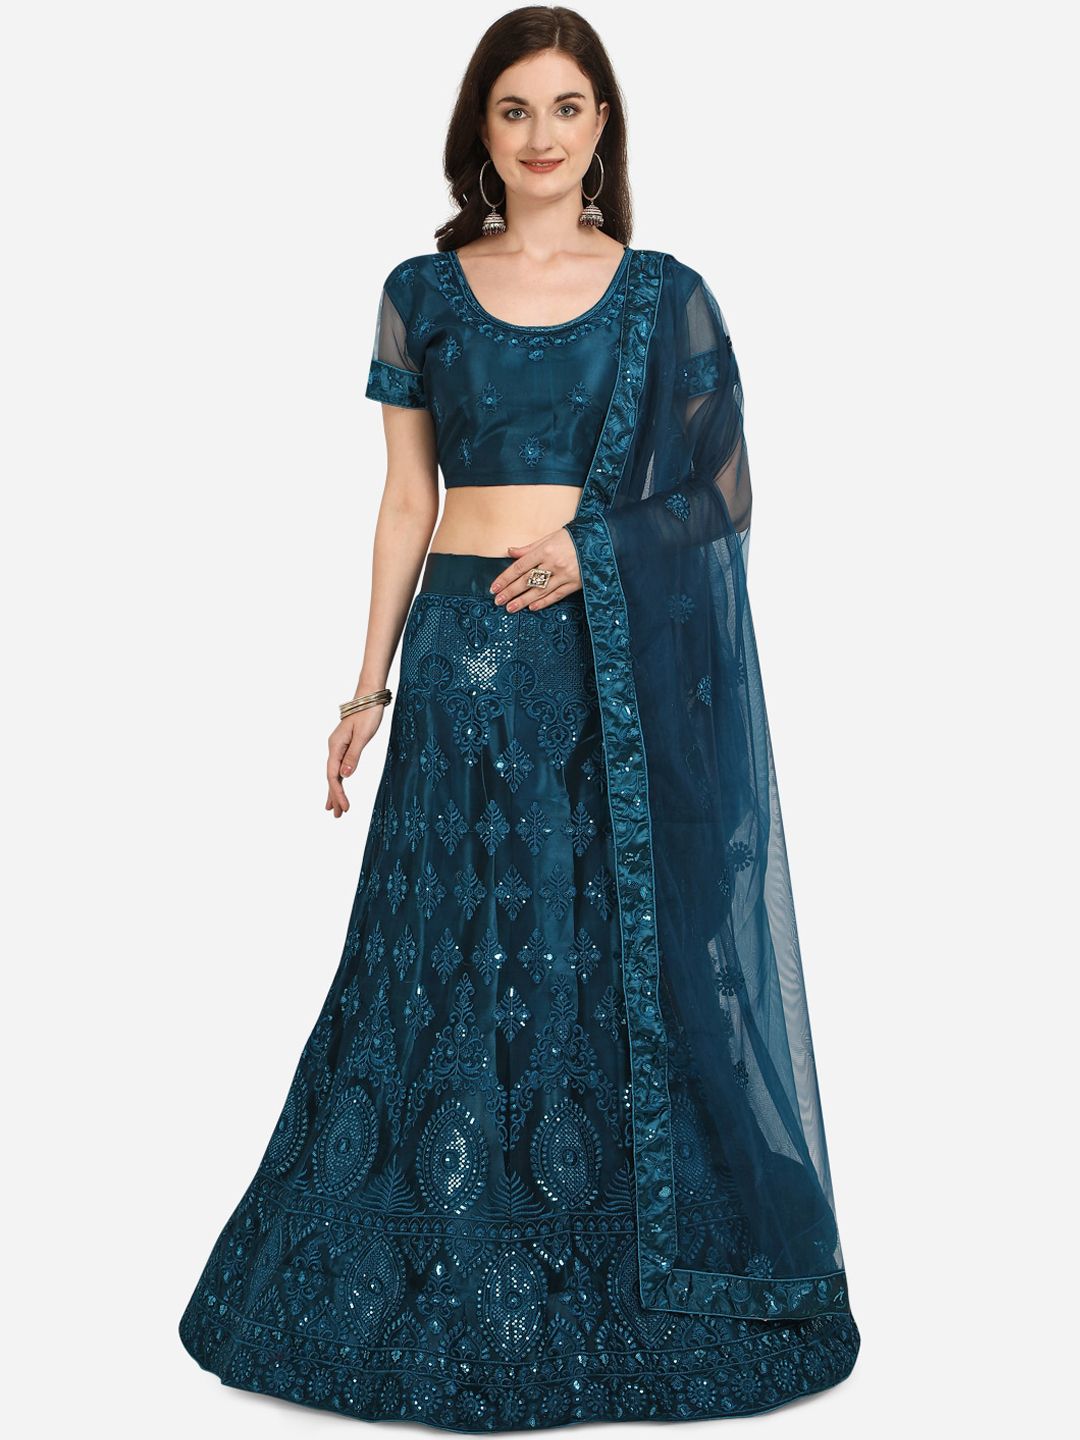 Netram Teal Embroidered Semi Stitched Lehenga & Blouse with Dupatta Price in India